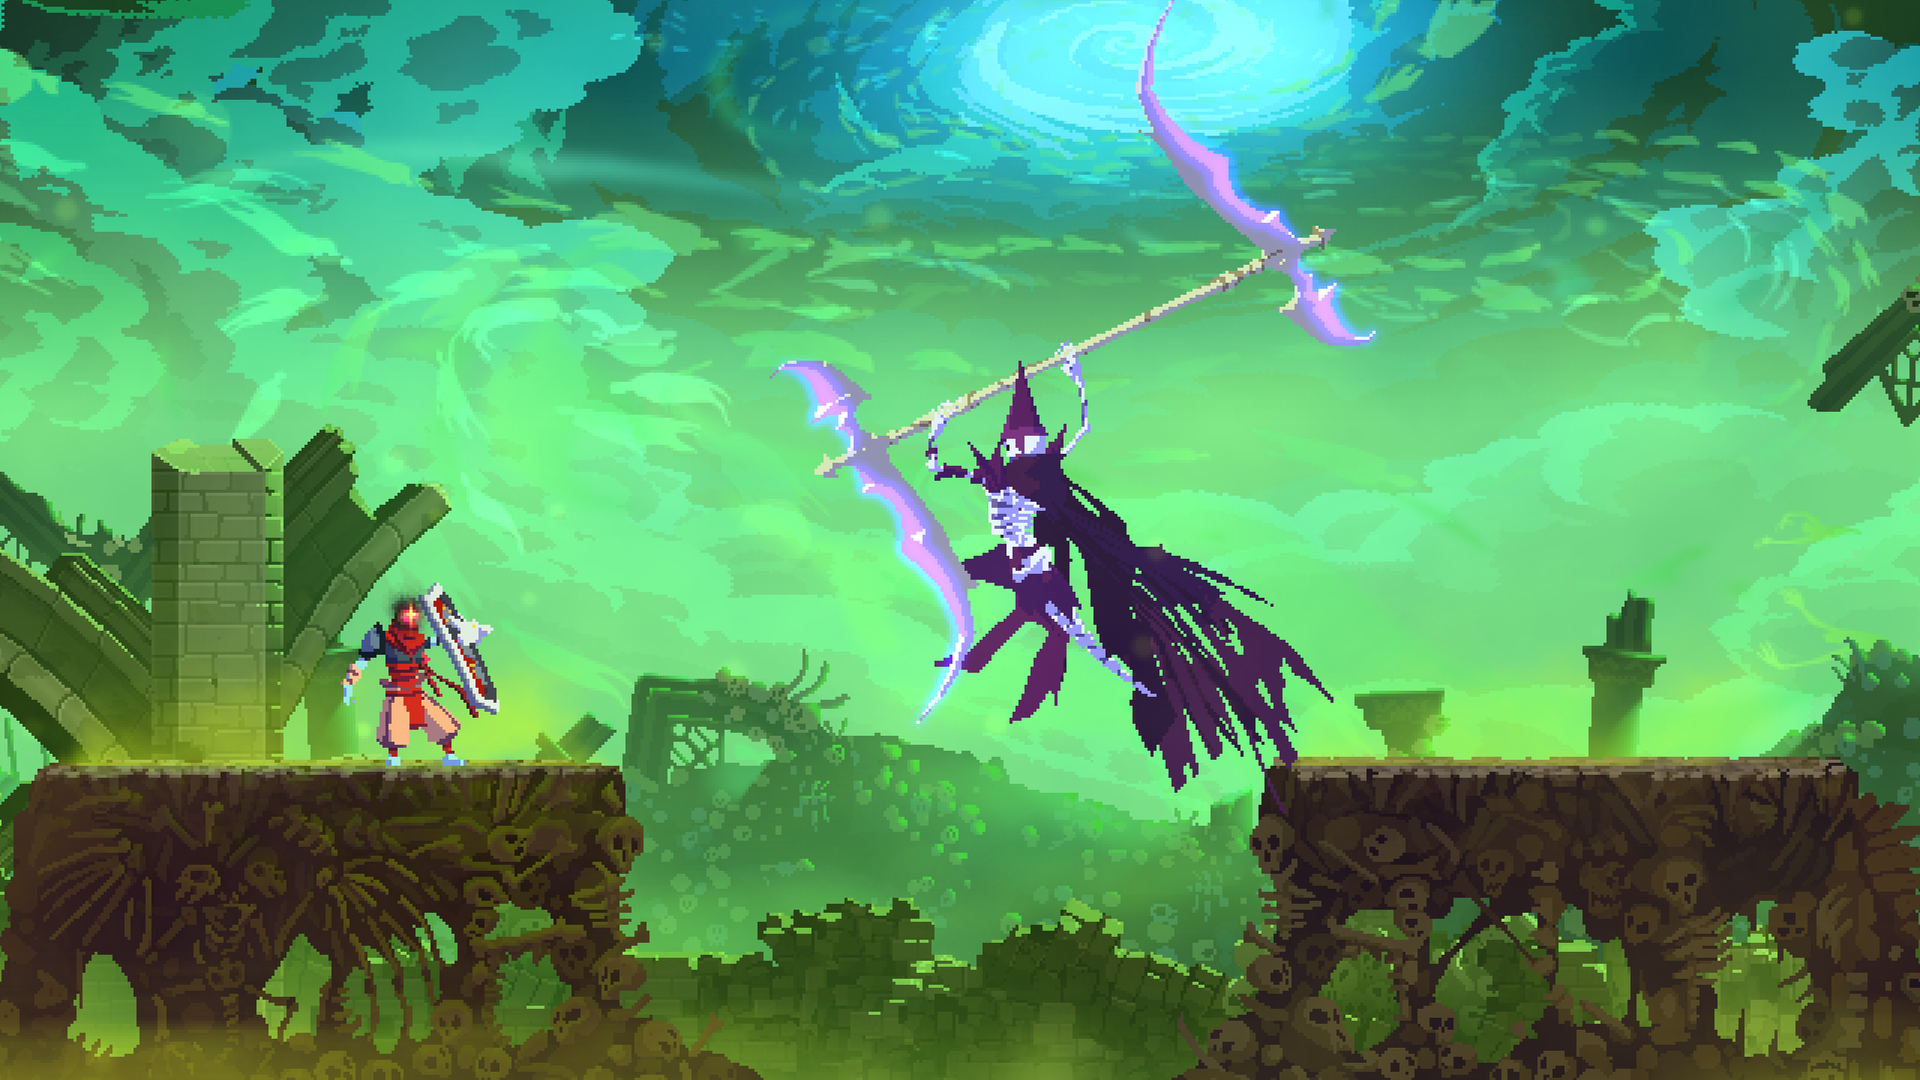 Video game screenshot of a warrior with a shield facing off against a skeleton with a scythe. The sky behind them is green